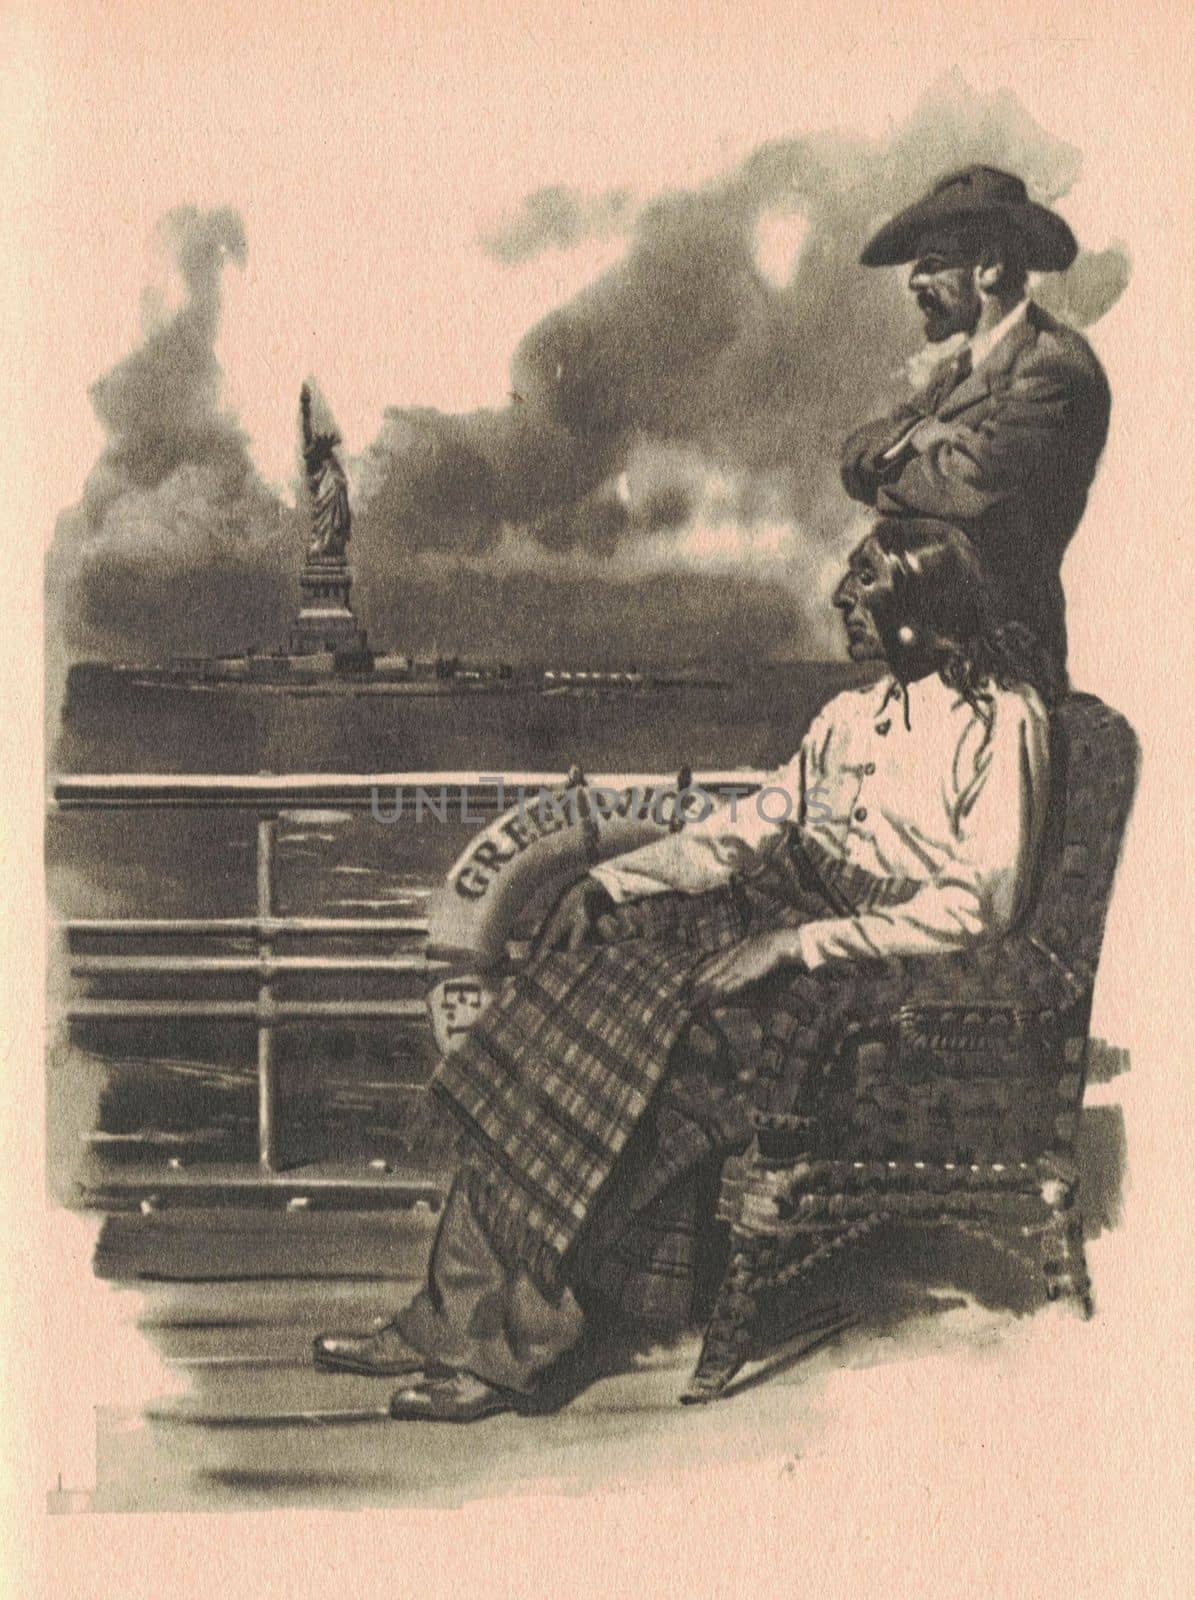 Black and white illustration shows an old American Indian and a white man on board. Drawing shows life in the Old West. Vintage black and white picture shows adventure life in the previous century.